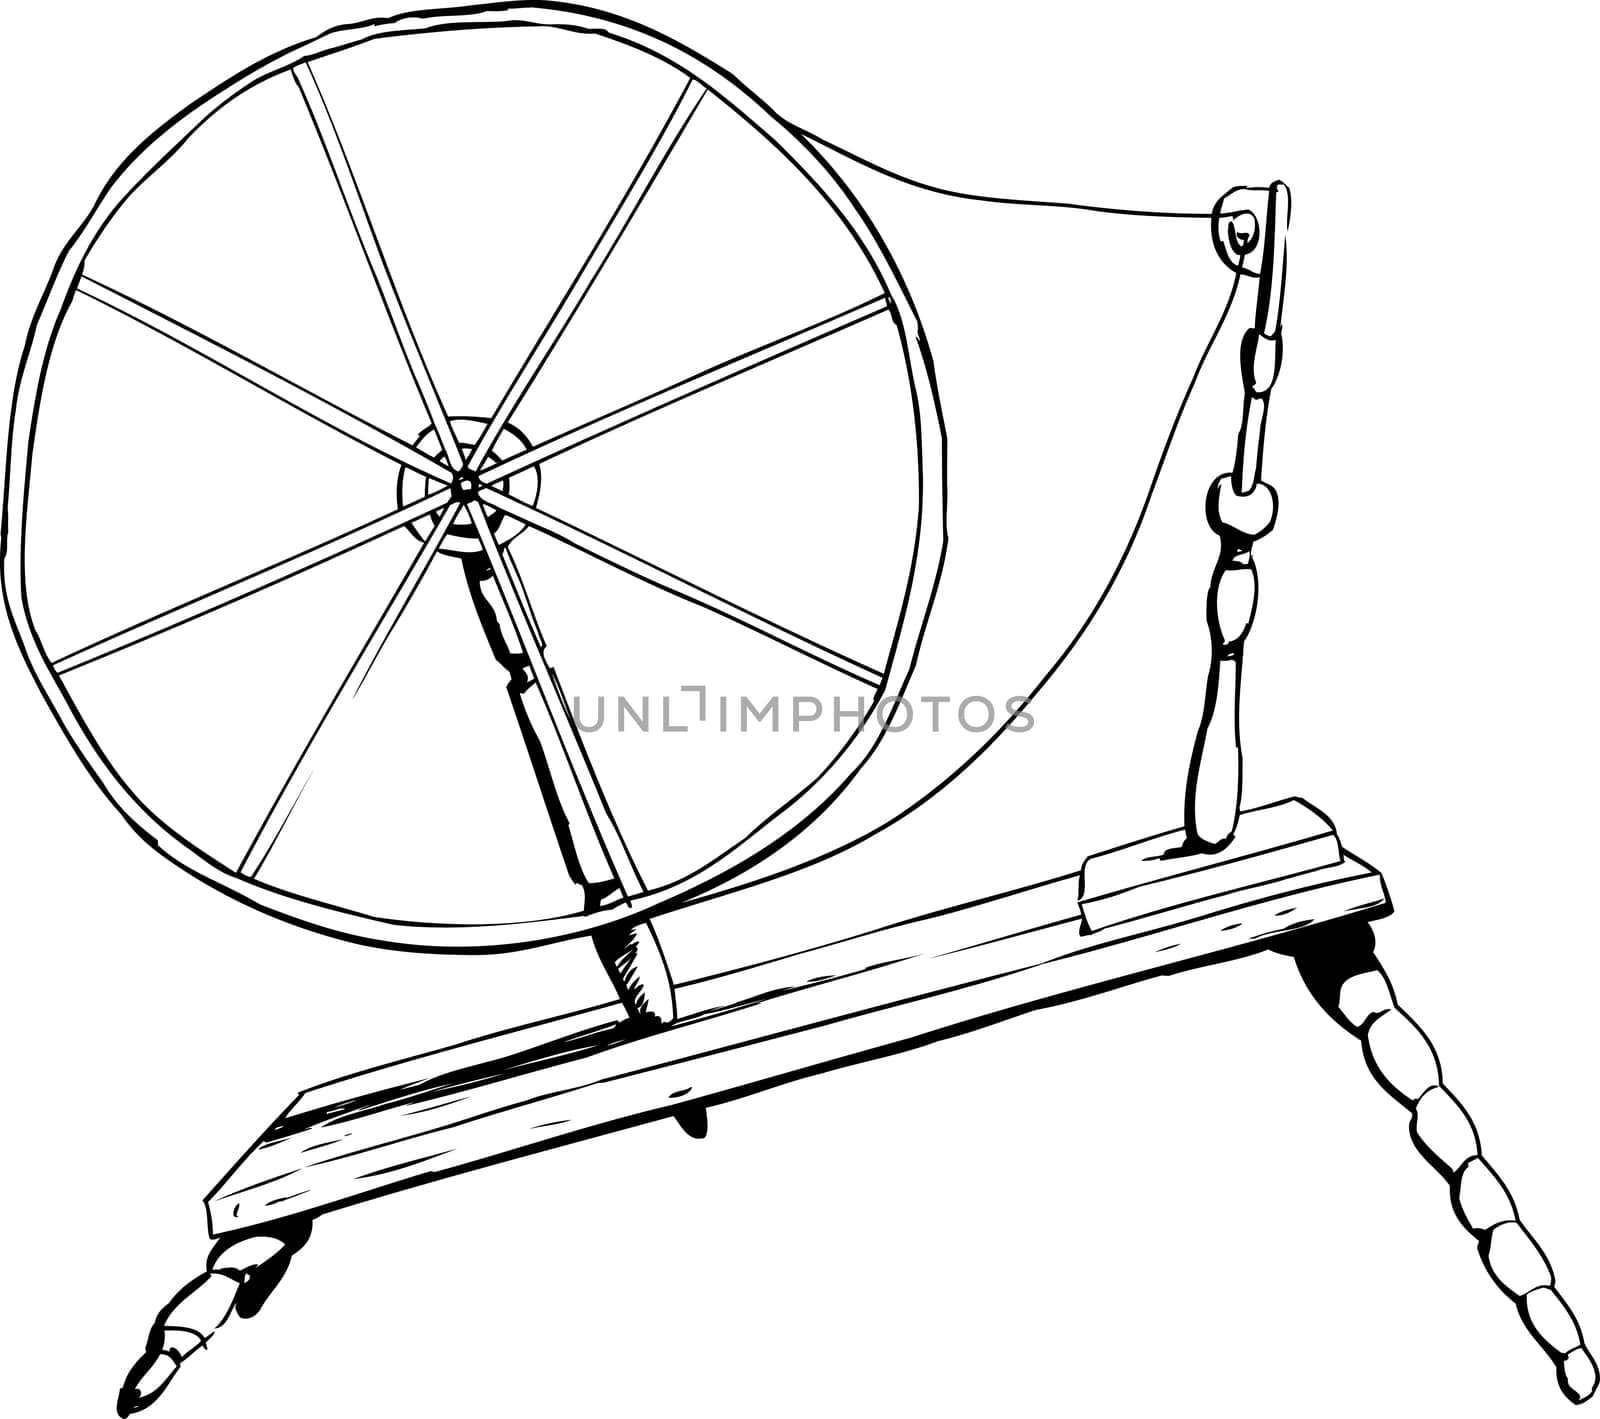 Antique Spinning Wheel Outline by TheBlackRhino